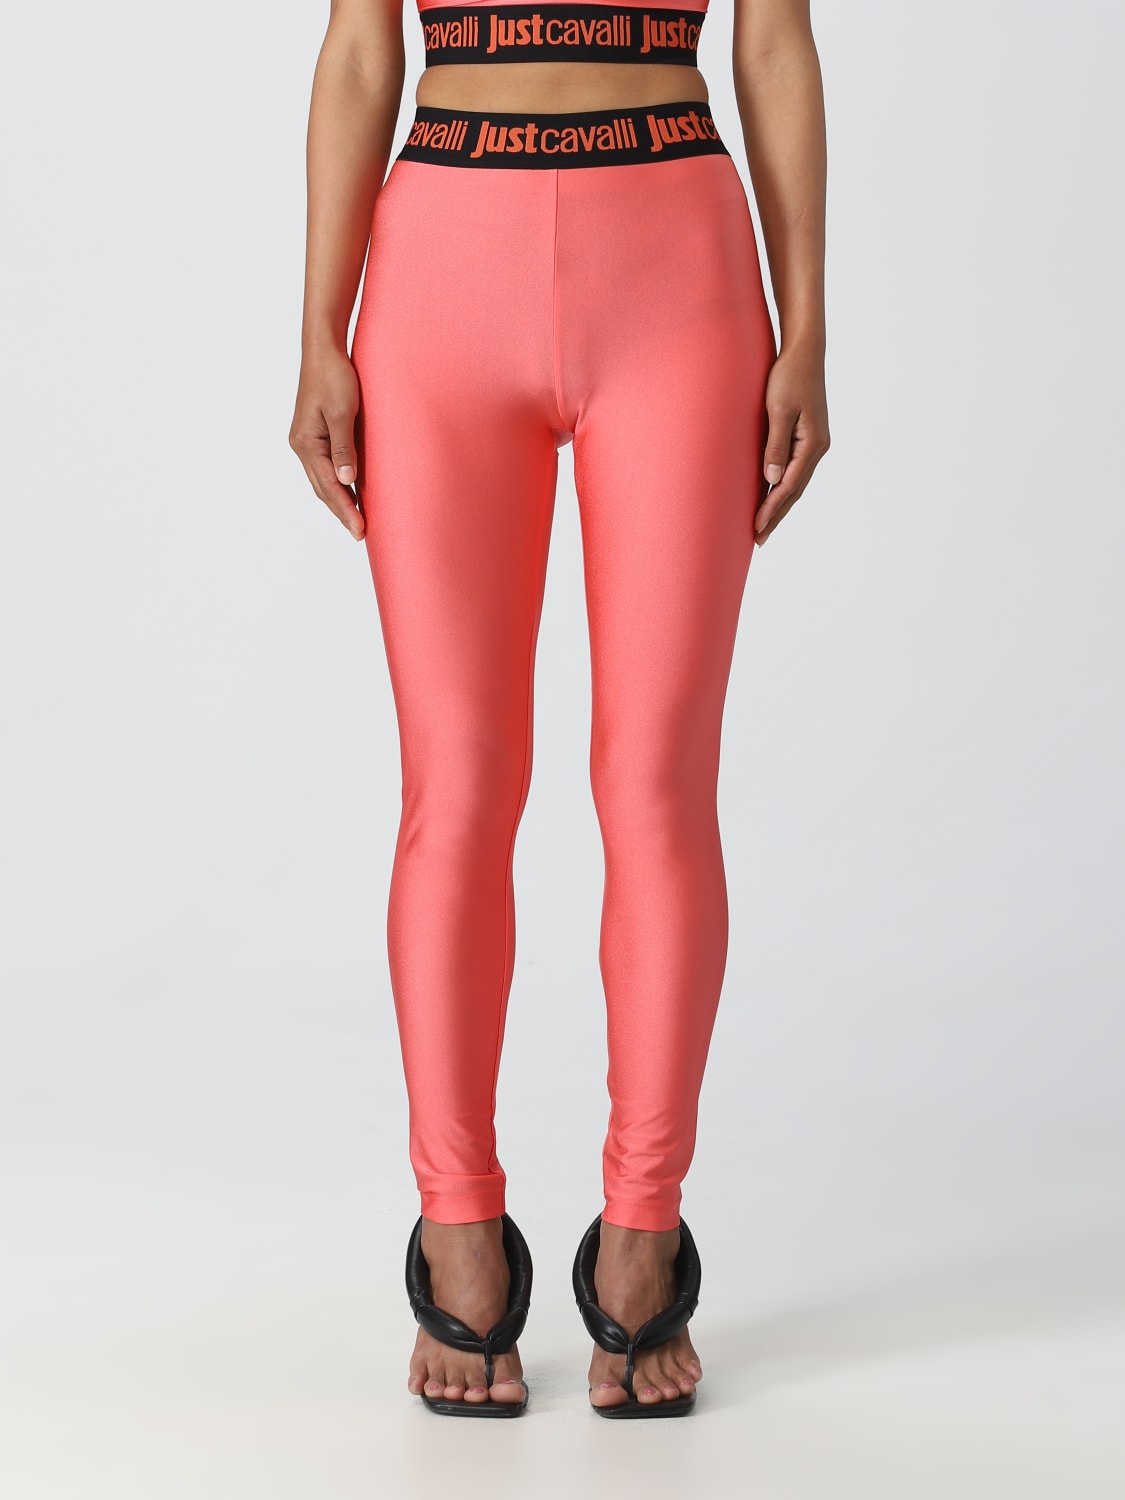 JUST CAVALLI Outlet: Pants woman - Pink  JUST CAVALLI pants 74PBC100N0008  online at